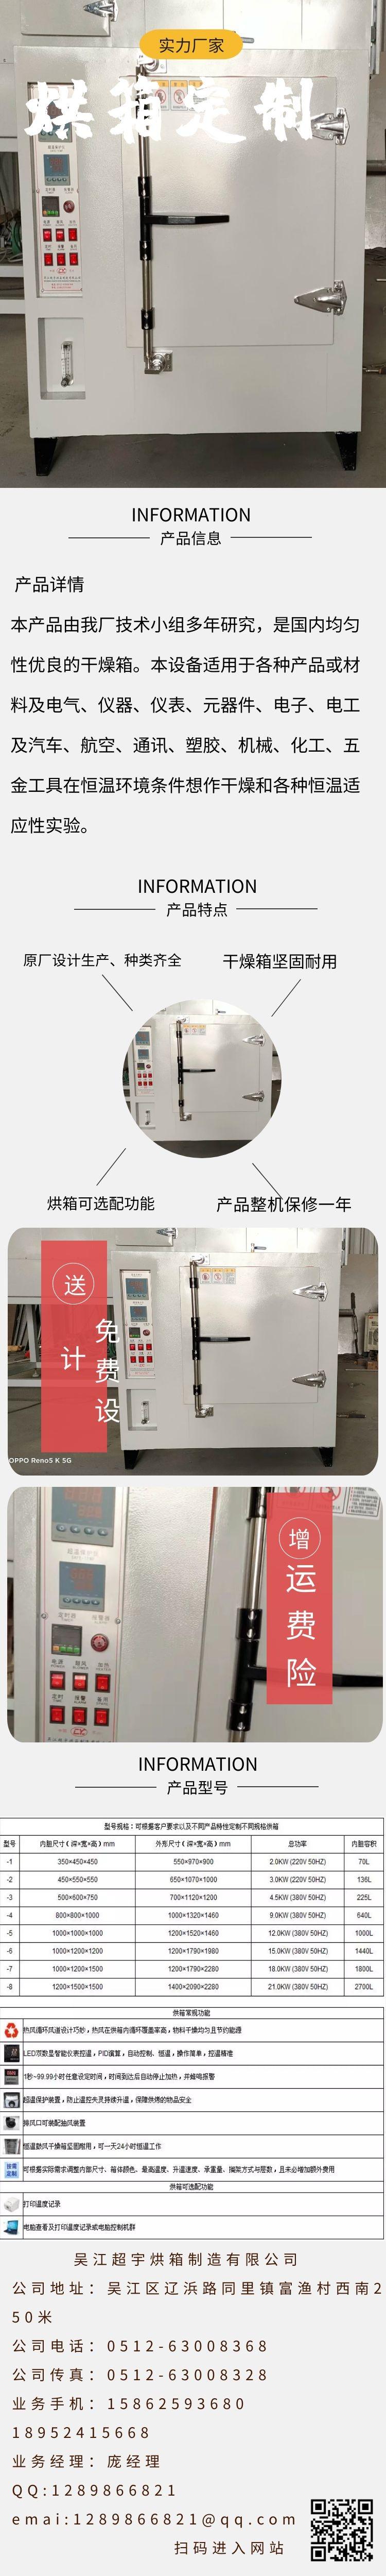 Chaoyu Drying Oven Manufacturing Rubber Industry Drying Oven Professional R&D Industrial Qualifications Complete